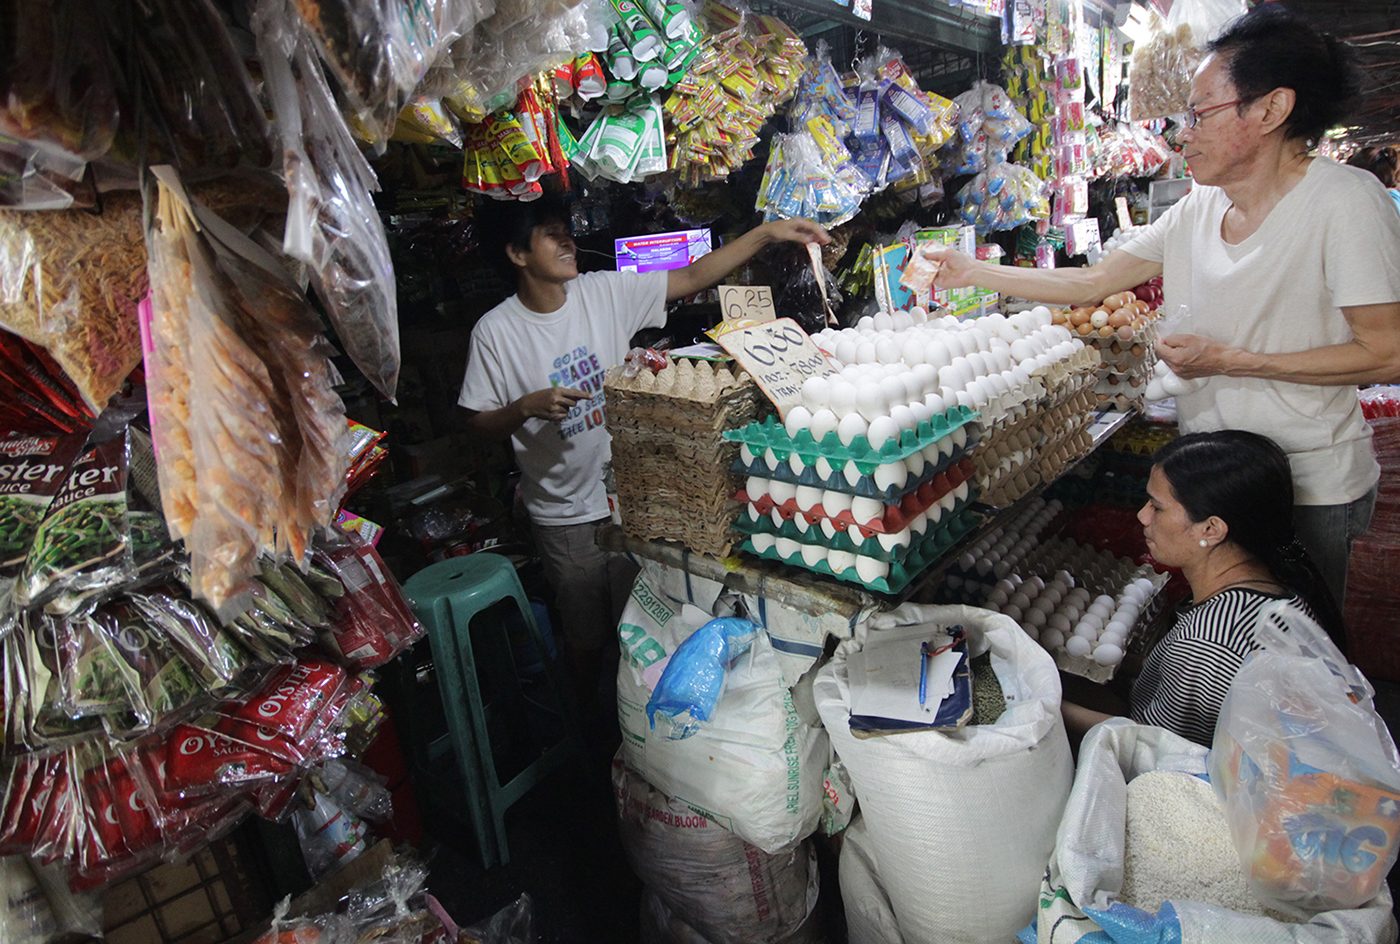 Inflation further slows to 0.8% in October 2019